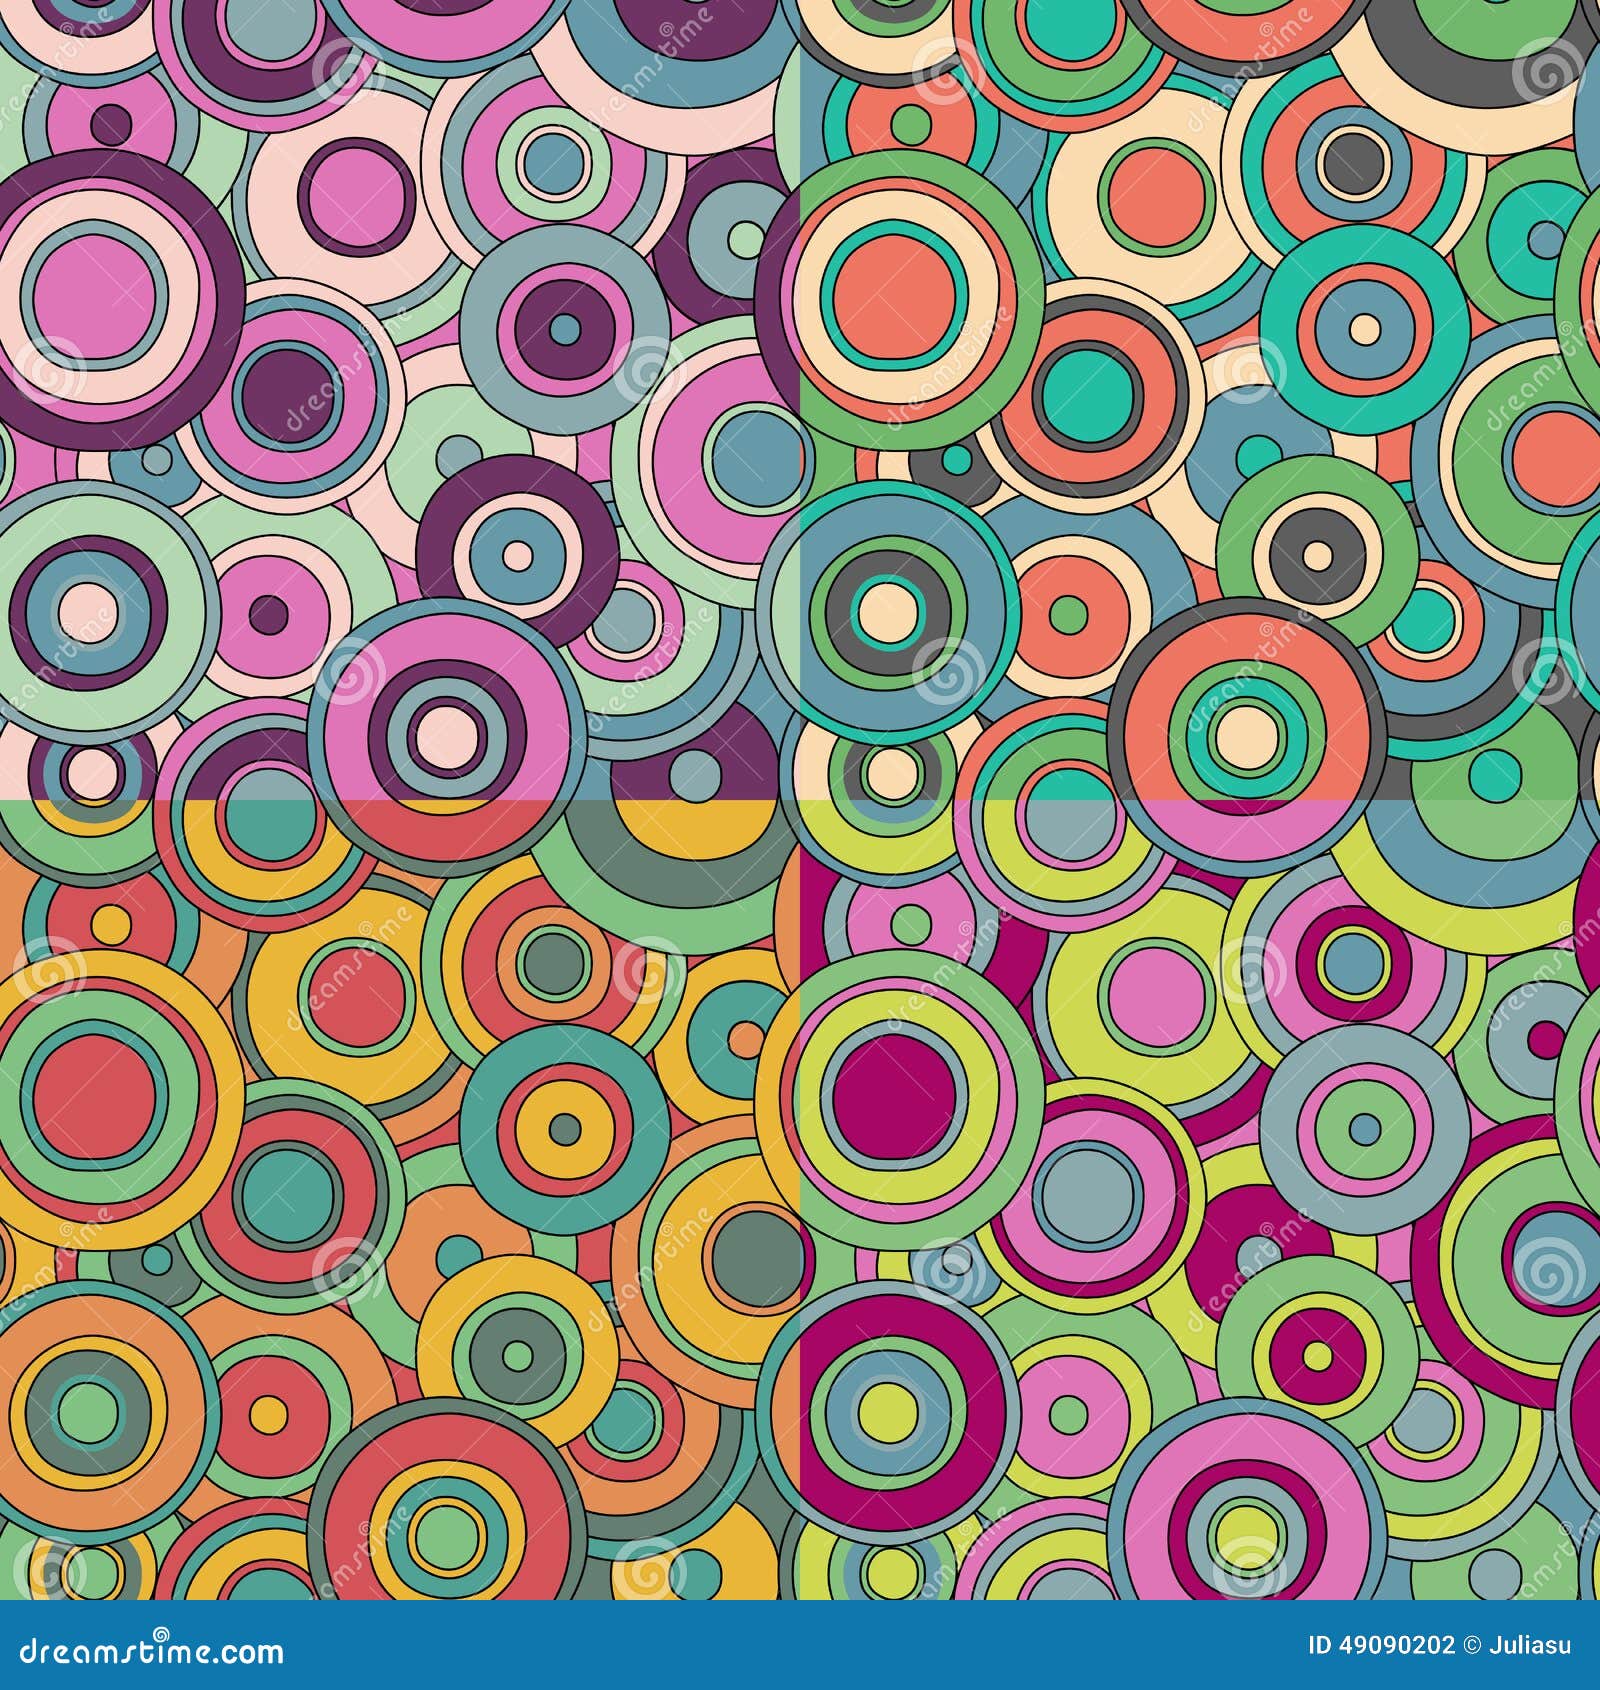 Set of 4 Bright Psychedelic Circles Pattern Stock Vector - Illustration ...